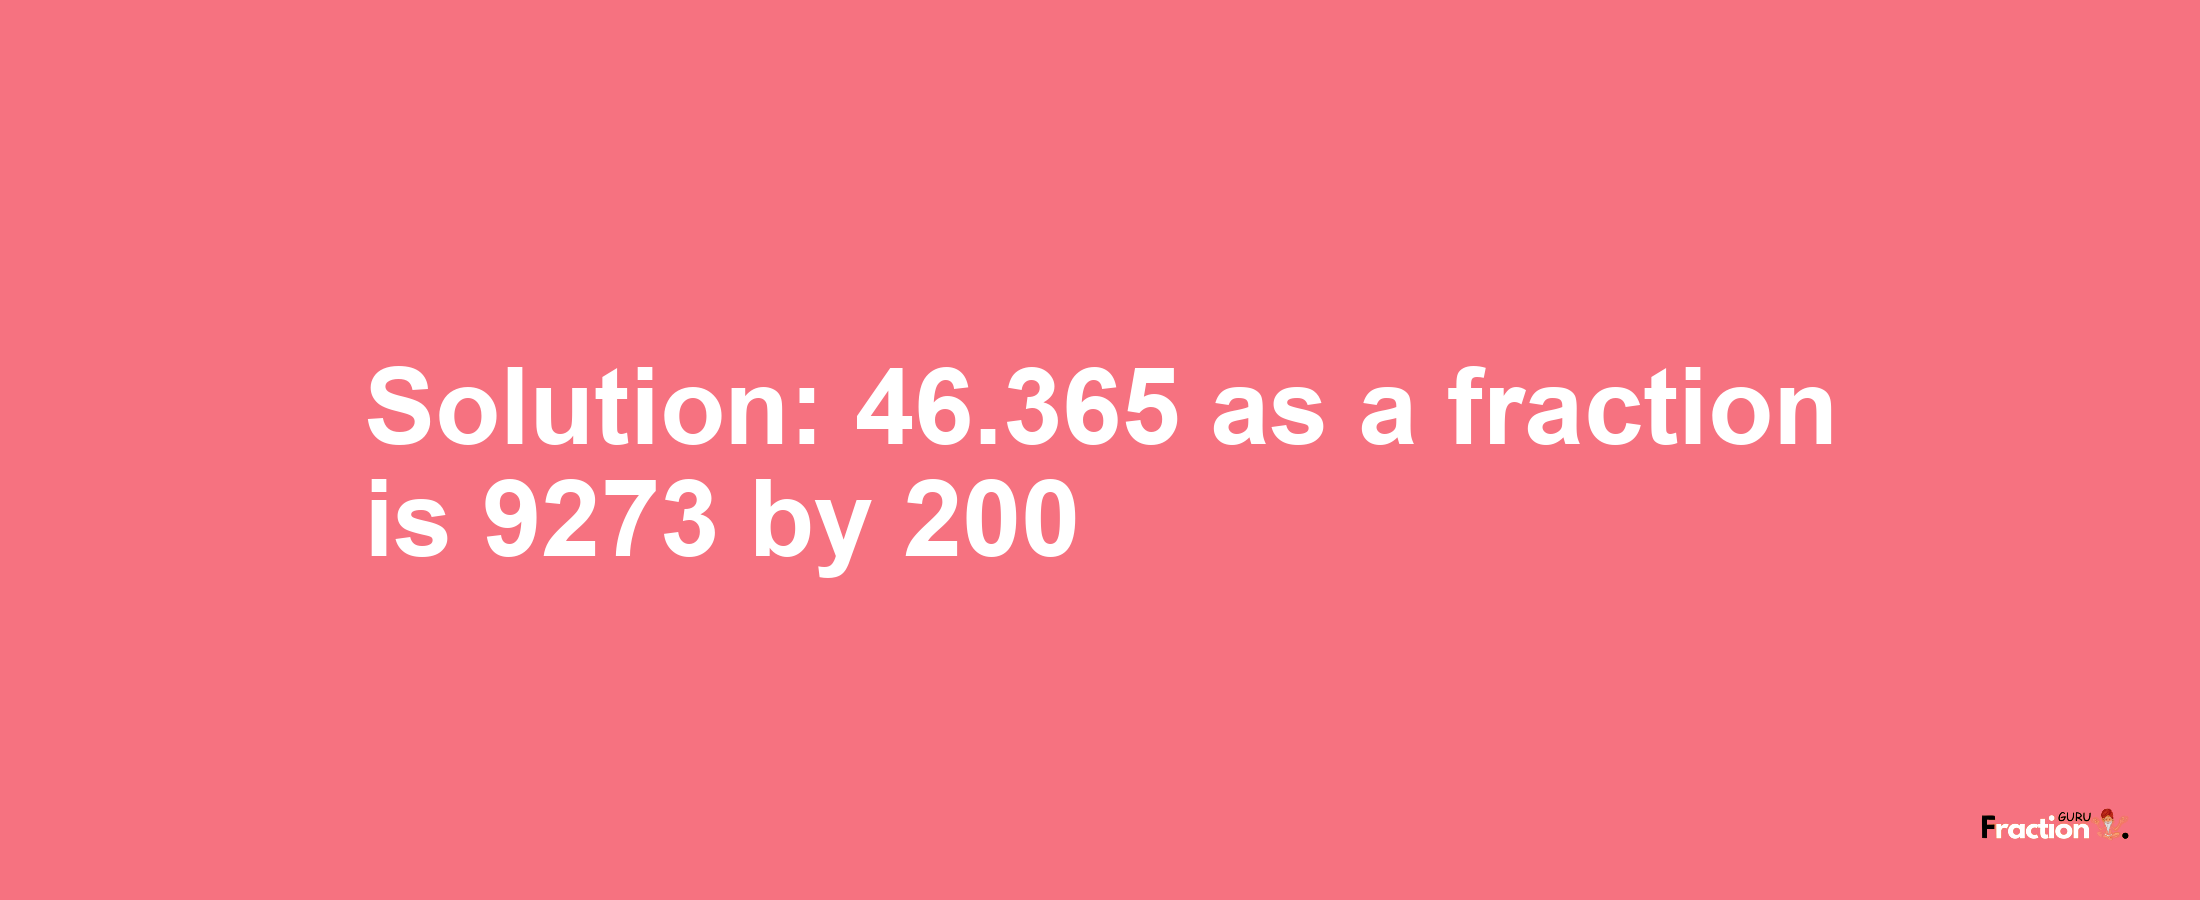 Solution:46.365 as a fraction is 9273/200